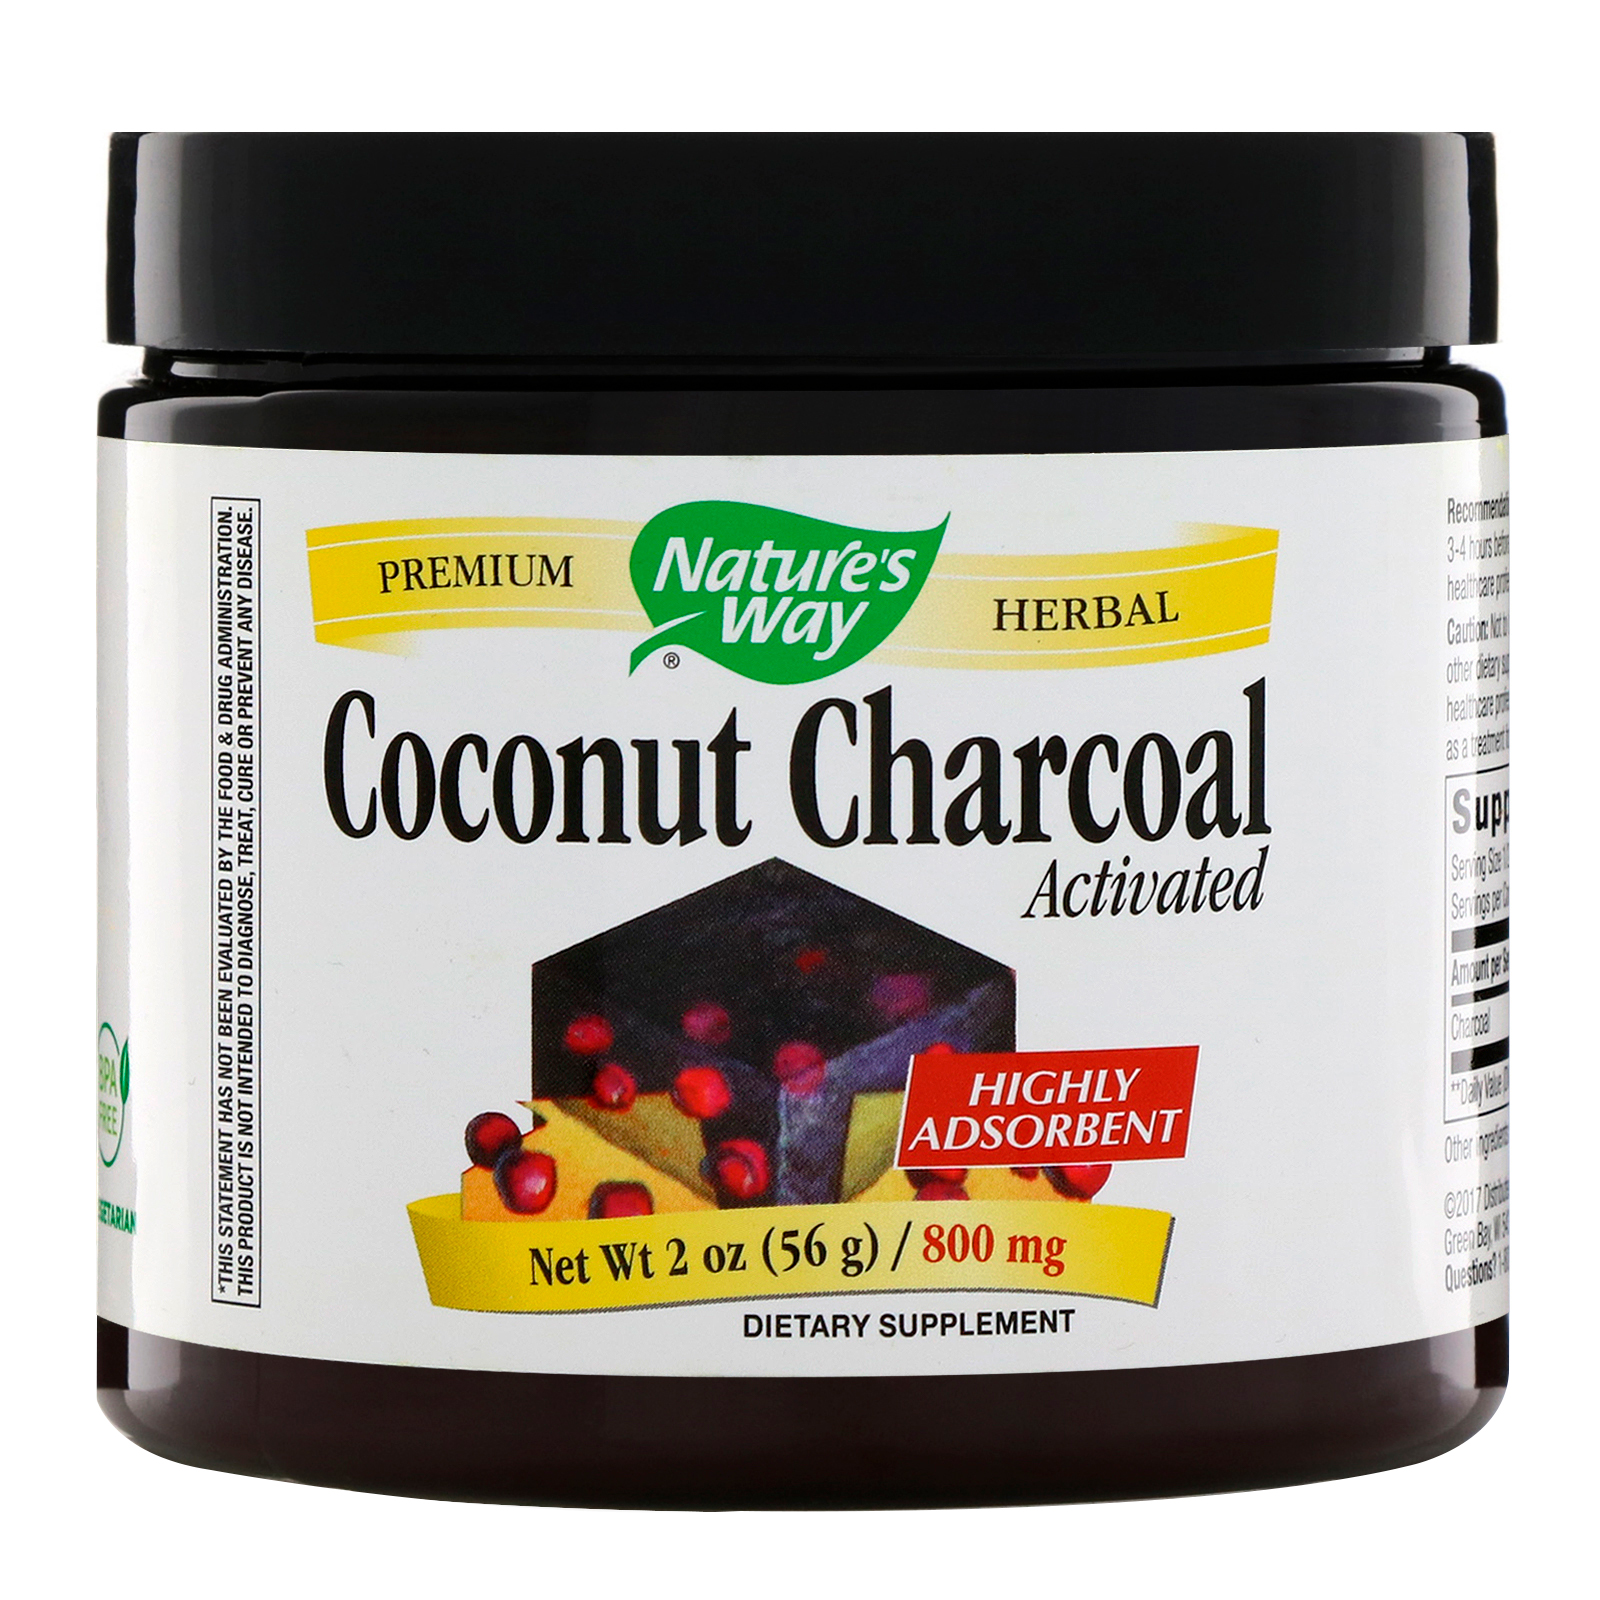 Nature's Way, Coconut Charcoal, Activated, 800 mg, 2 oz (56 g) - iHerb.com